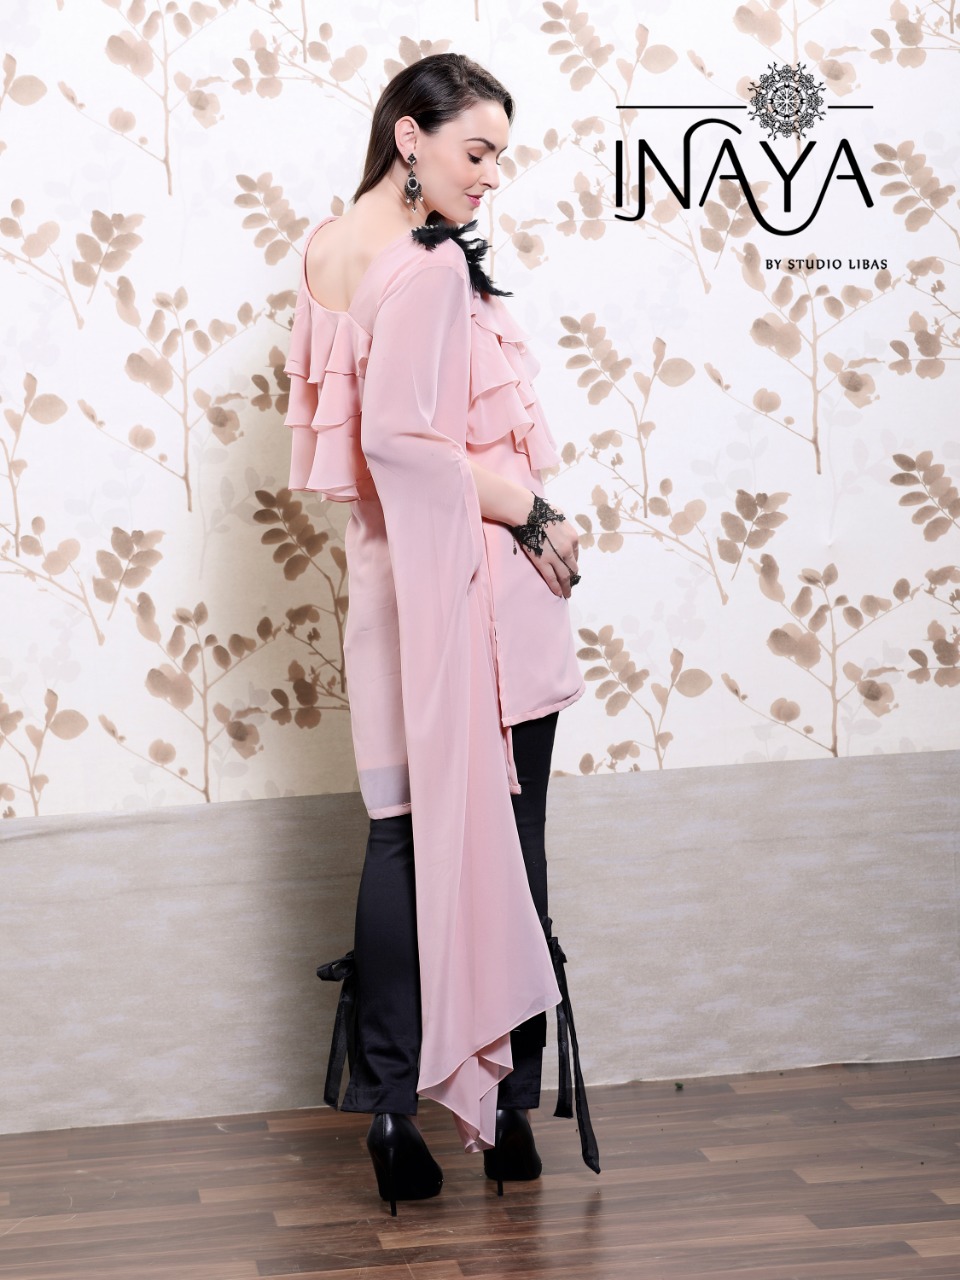 Inaya by studio libas presents luxury pret collection 9 stylish party wear tunic style kurti with cigarette pants concept